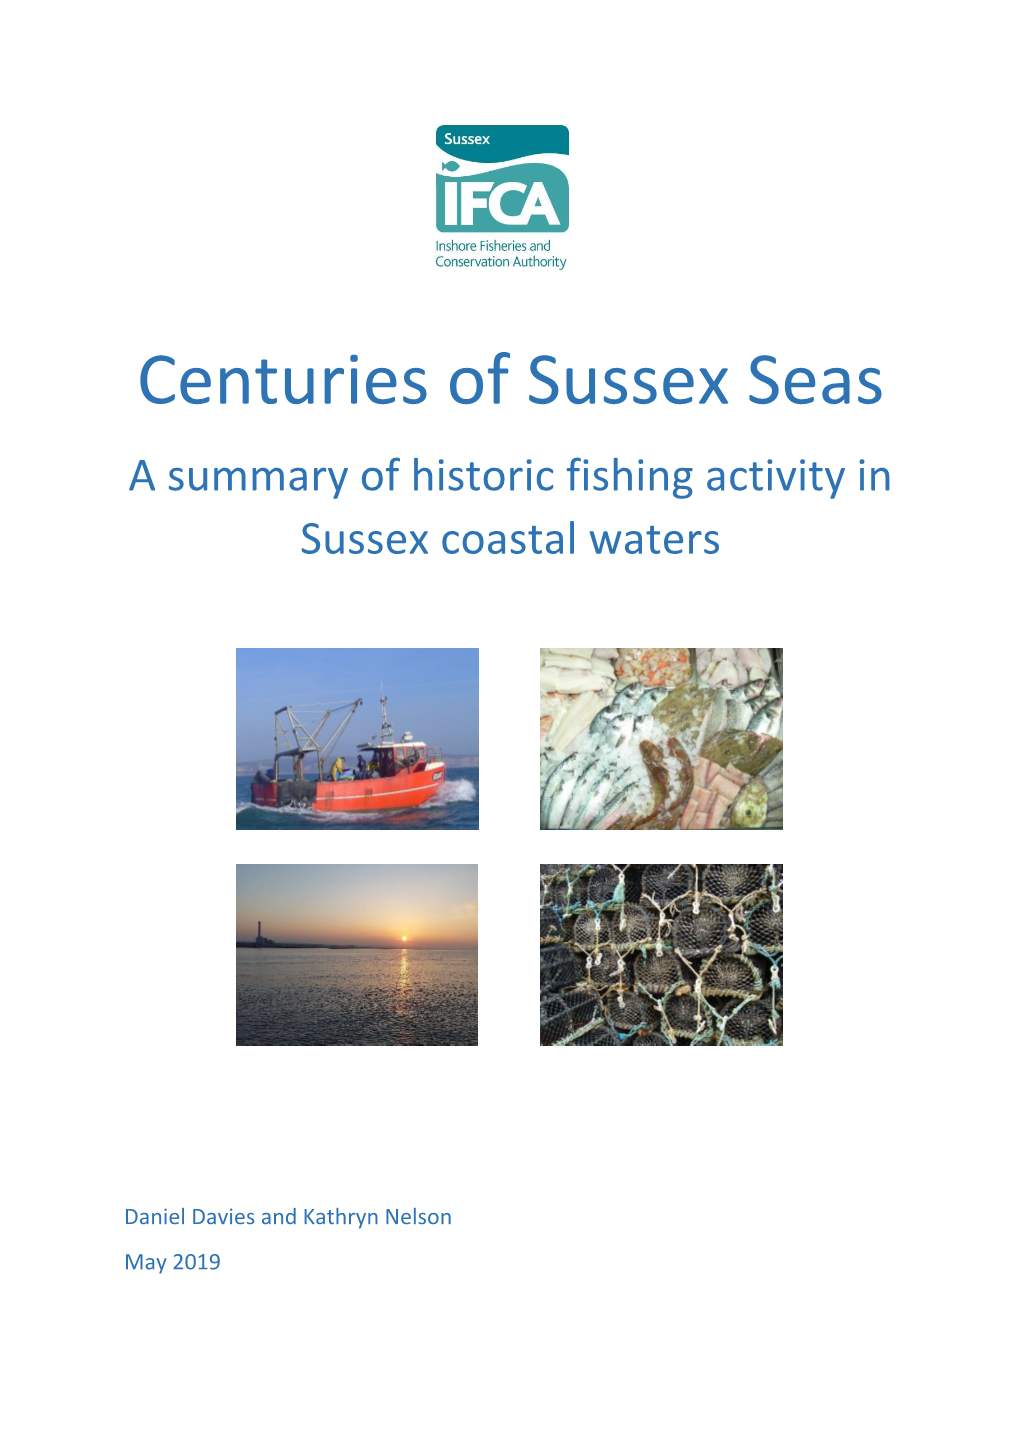 Centuries of Sussex Seas a Summary of Historic Fishing Activity in Sussex Coastal Waters